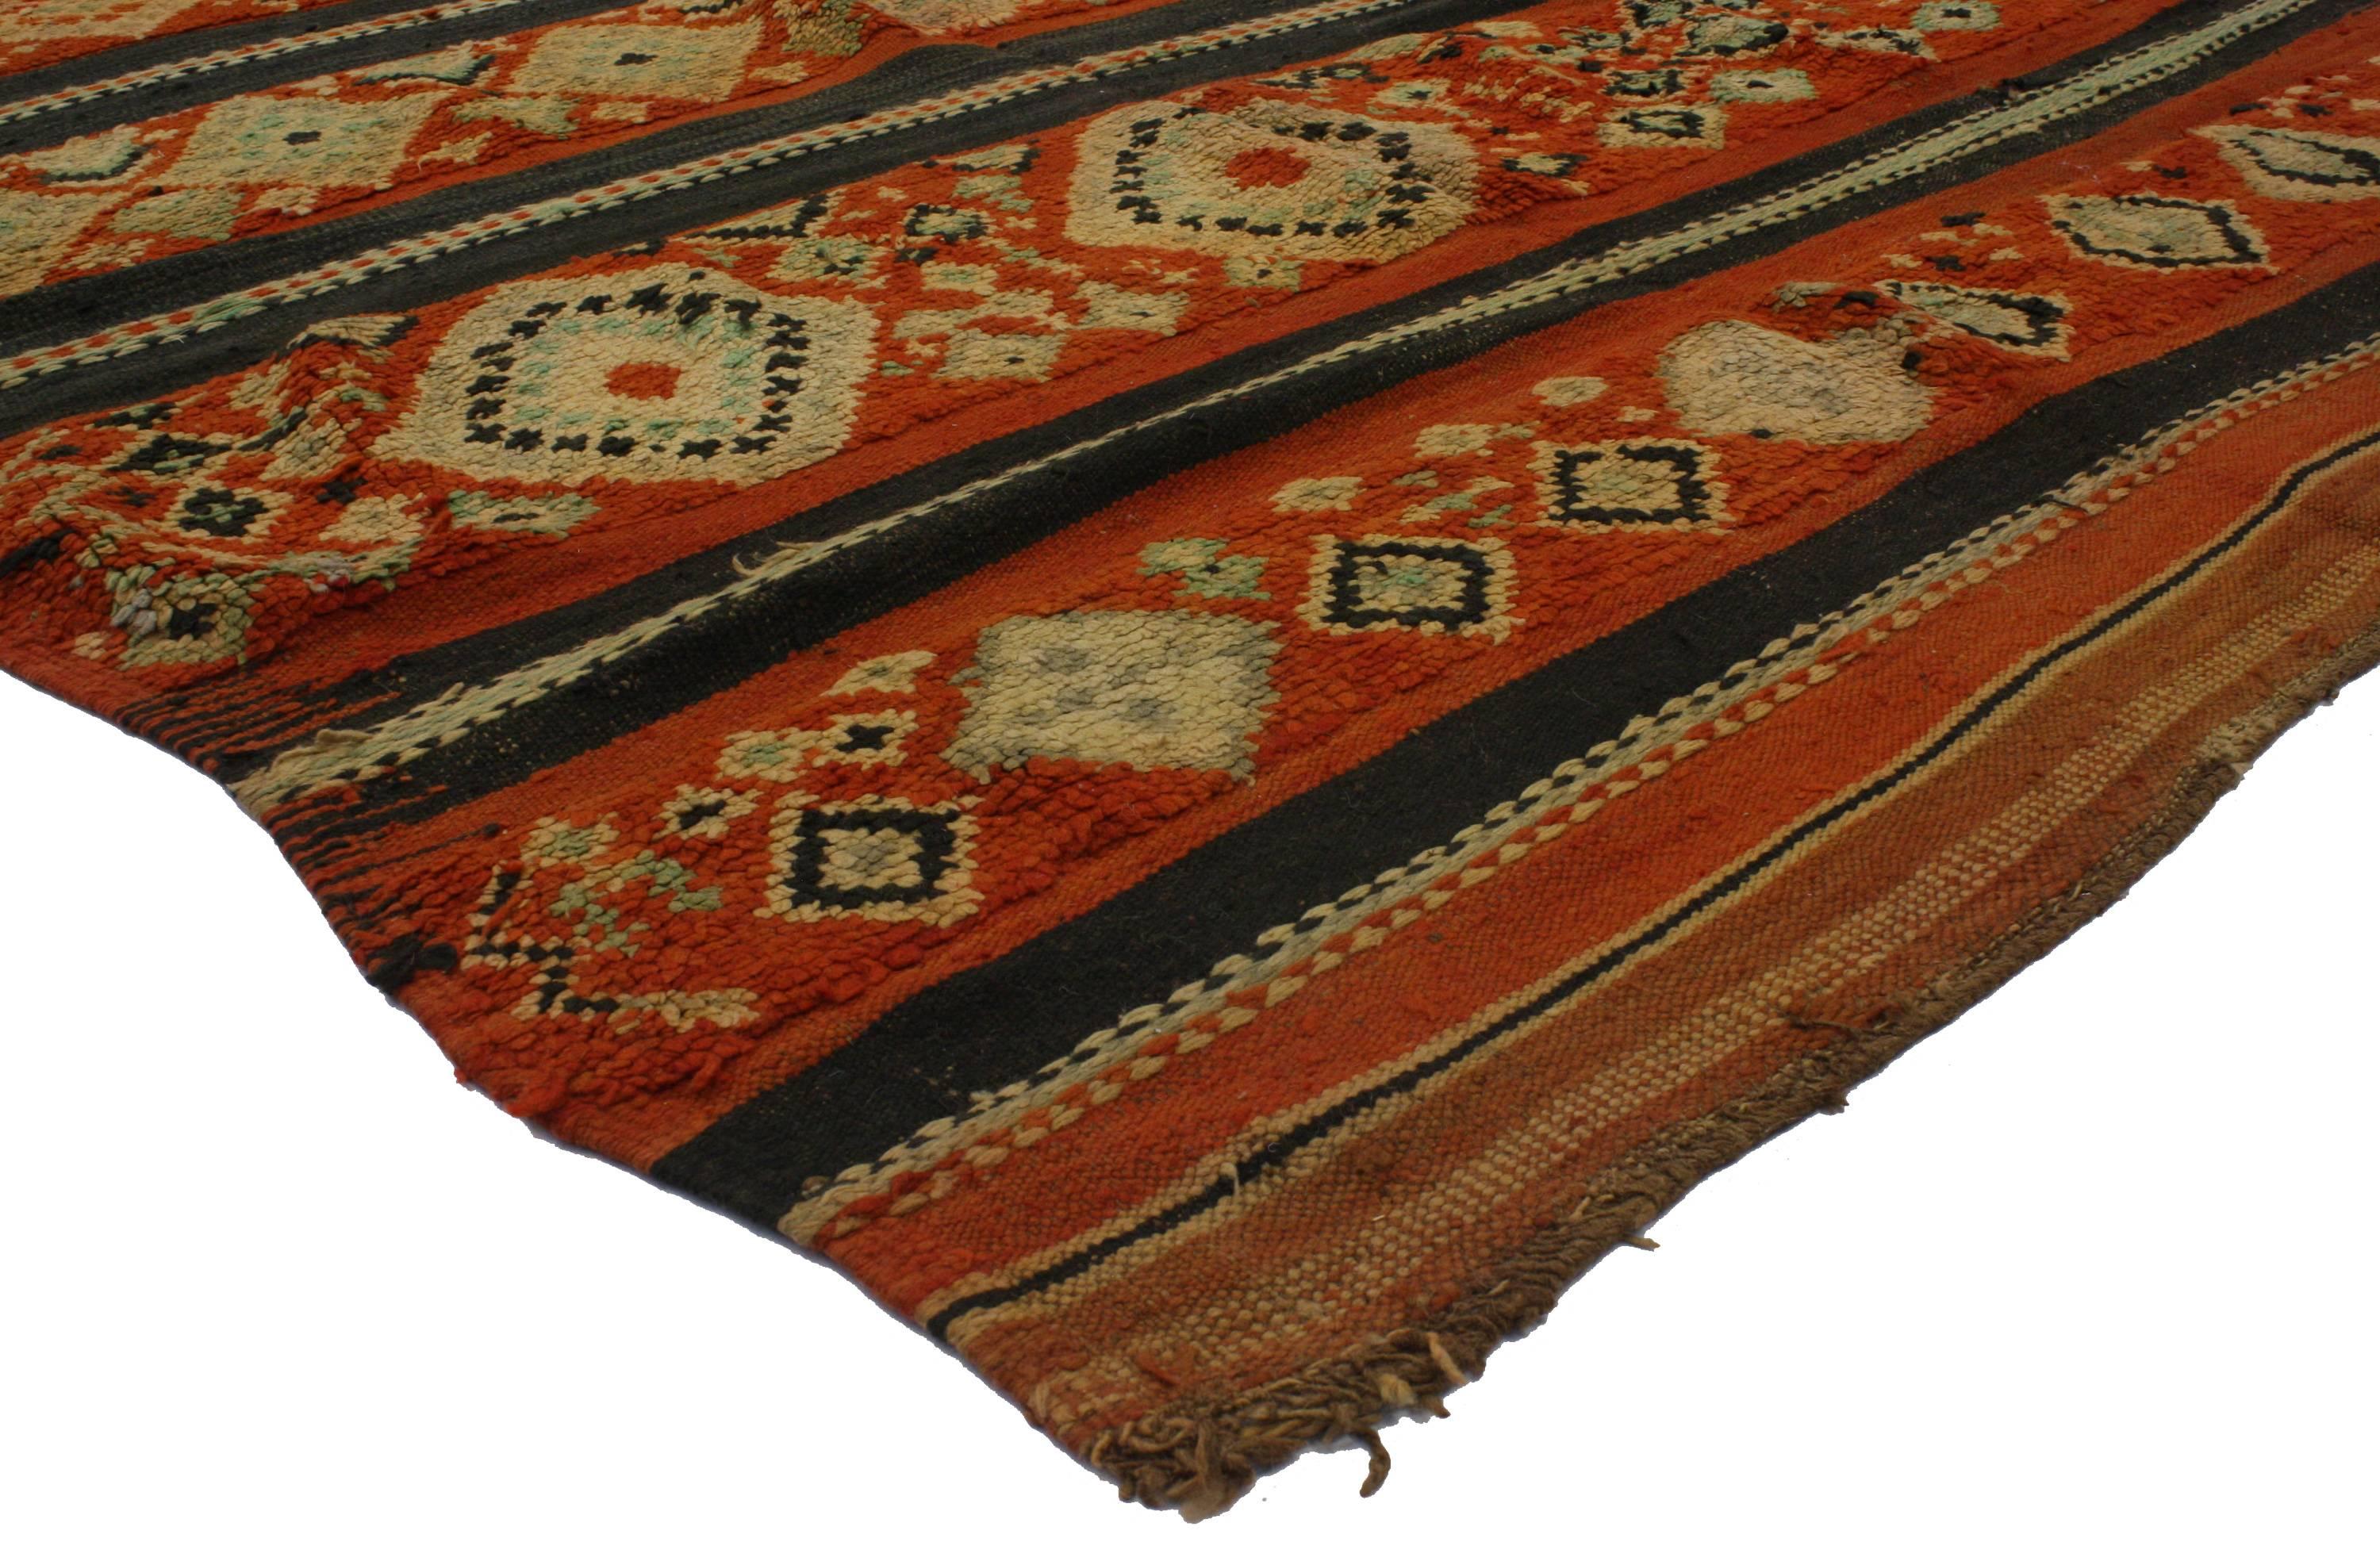 Saturated with good taste and Primitive charm, this vintage Berber Moroccan rug features modern tribal style. It is swathed in variegated shades of rust, orange-red, hot pink, orange, rust, mint green, lavender, beige, brown and black. Give your